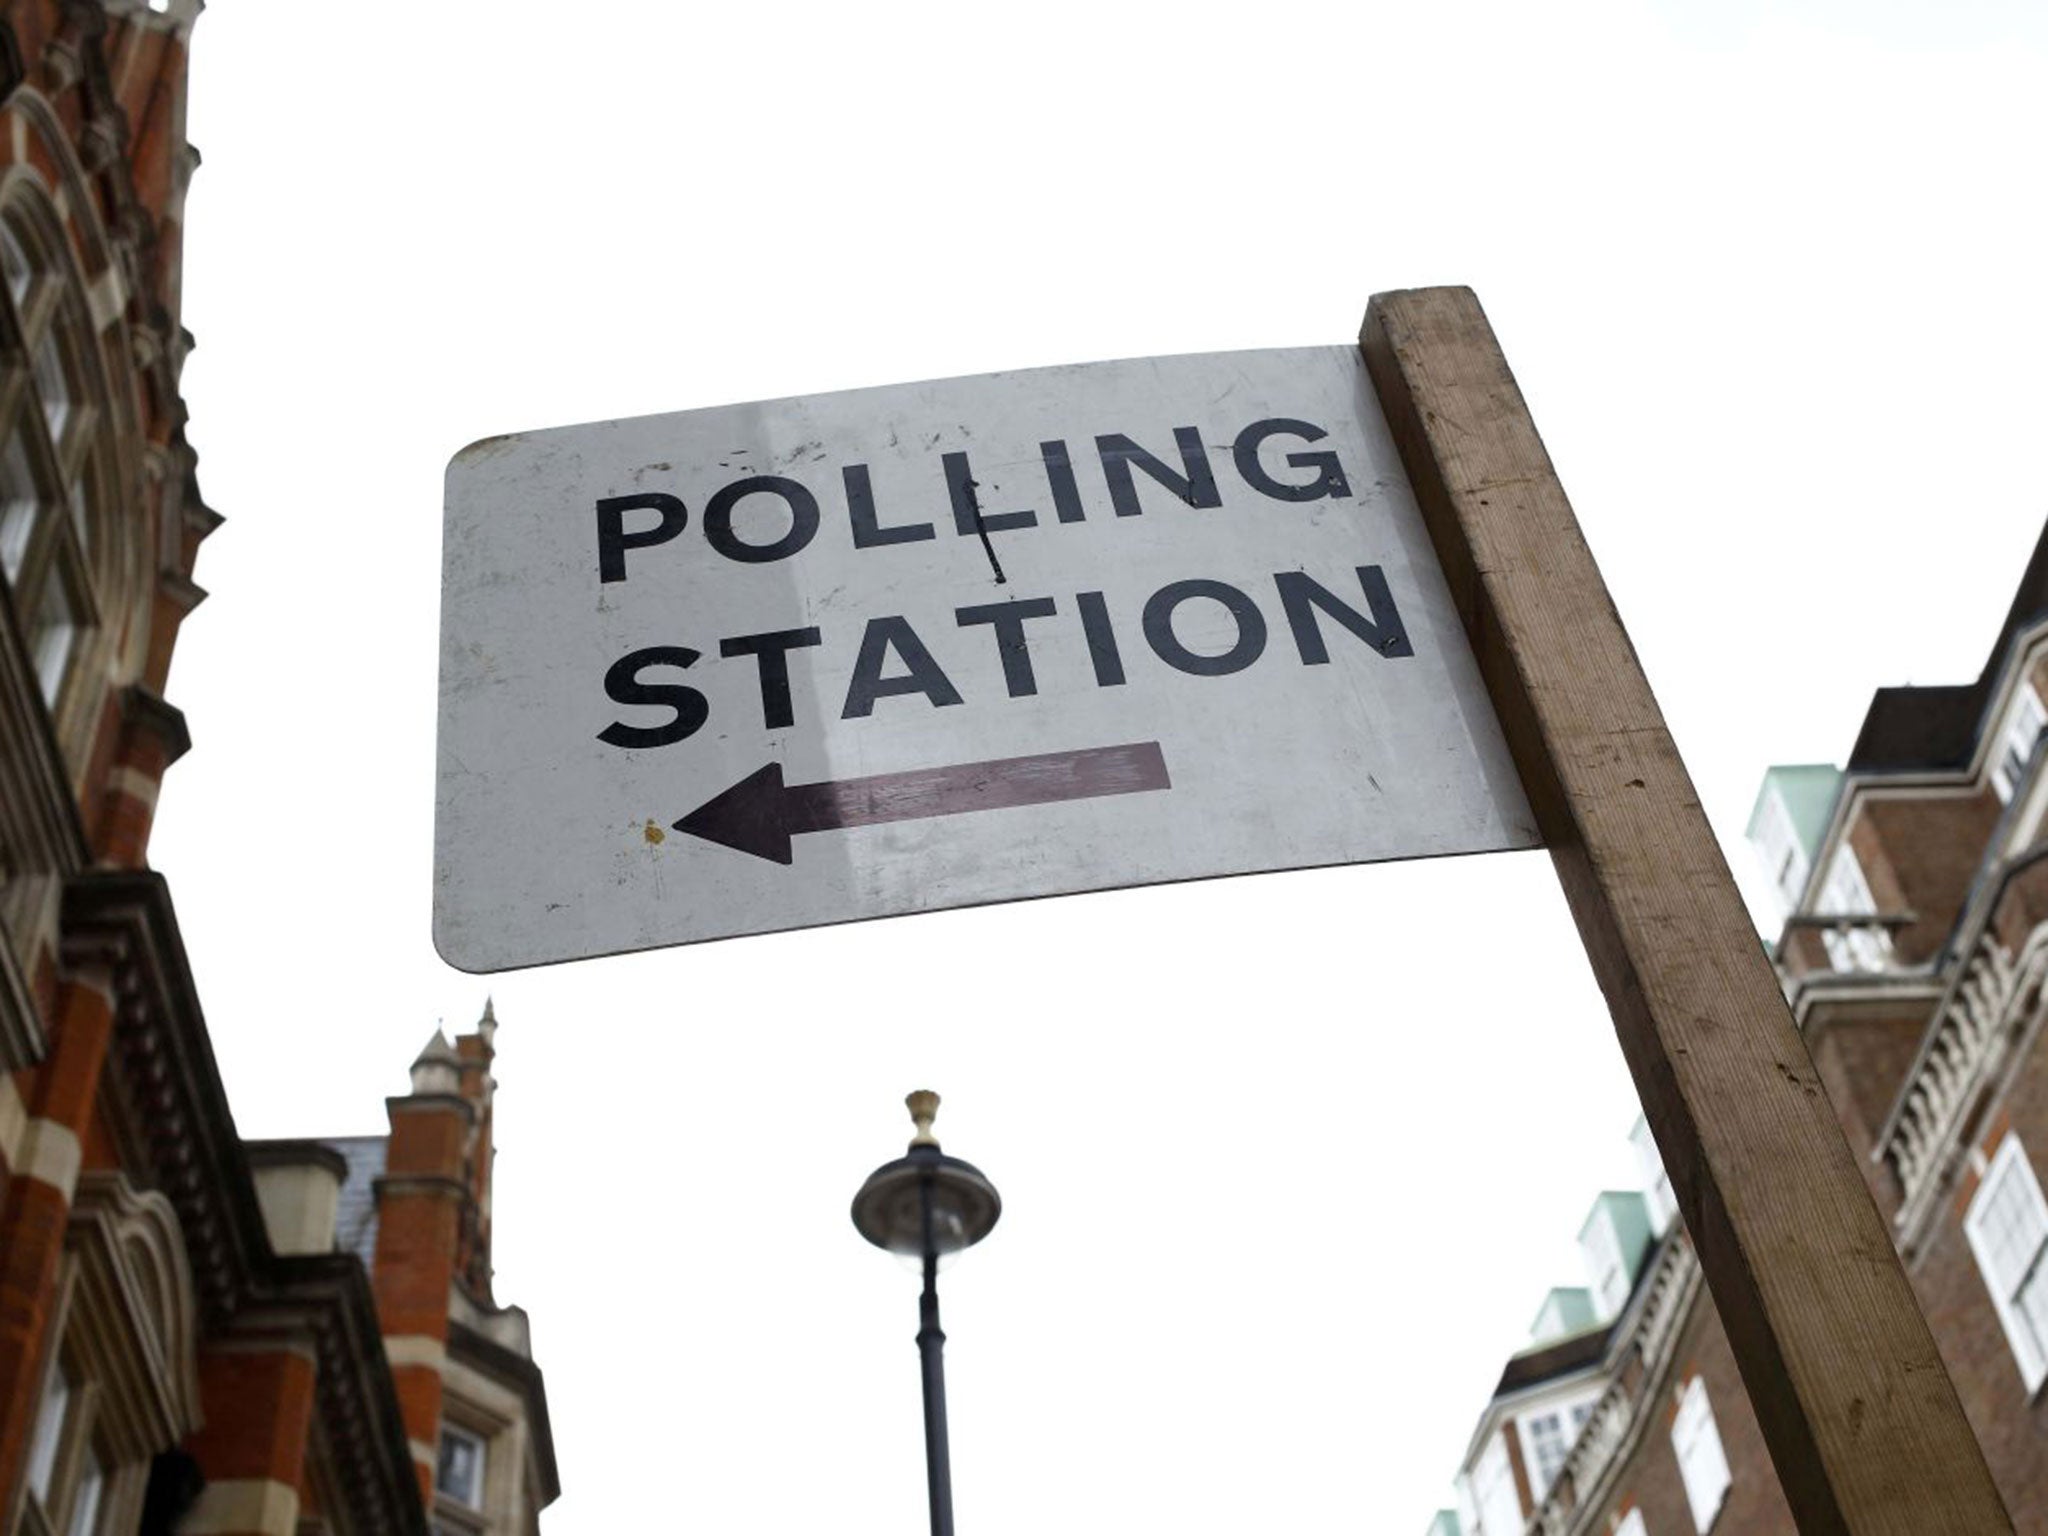 A polling station sign is seen in central London, Britain on 21 June 2016.